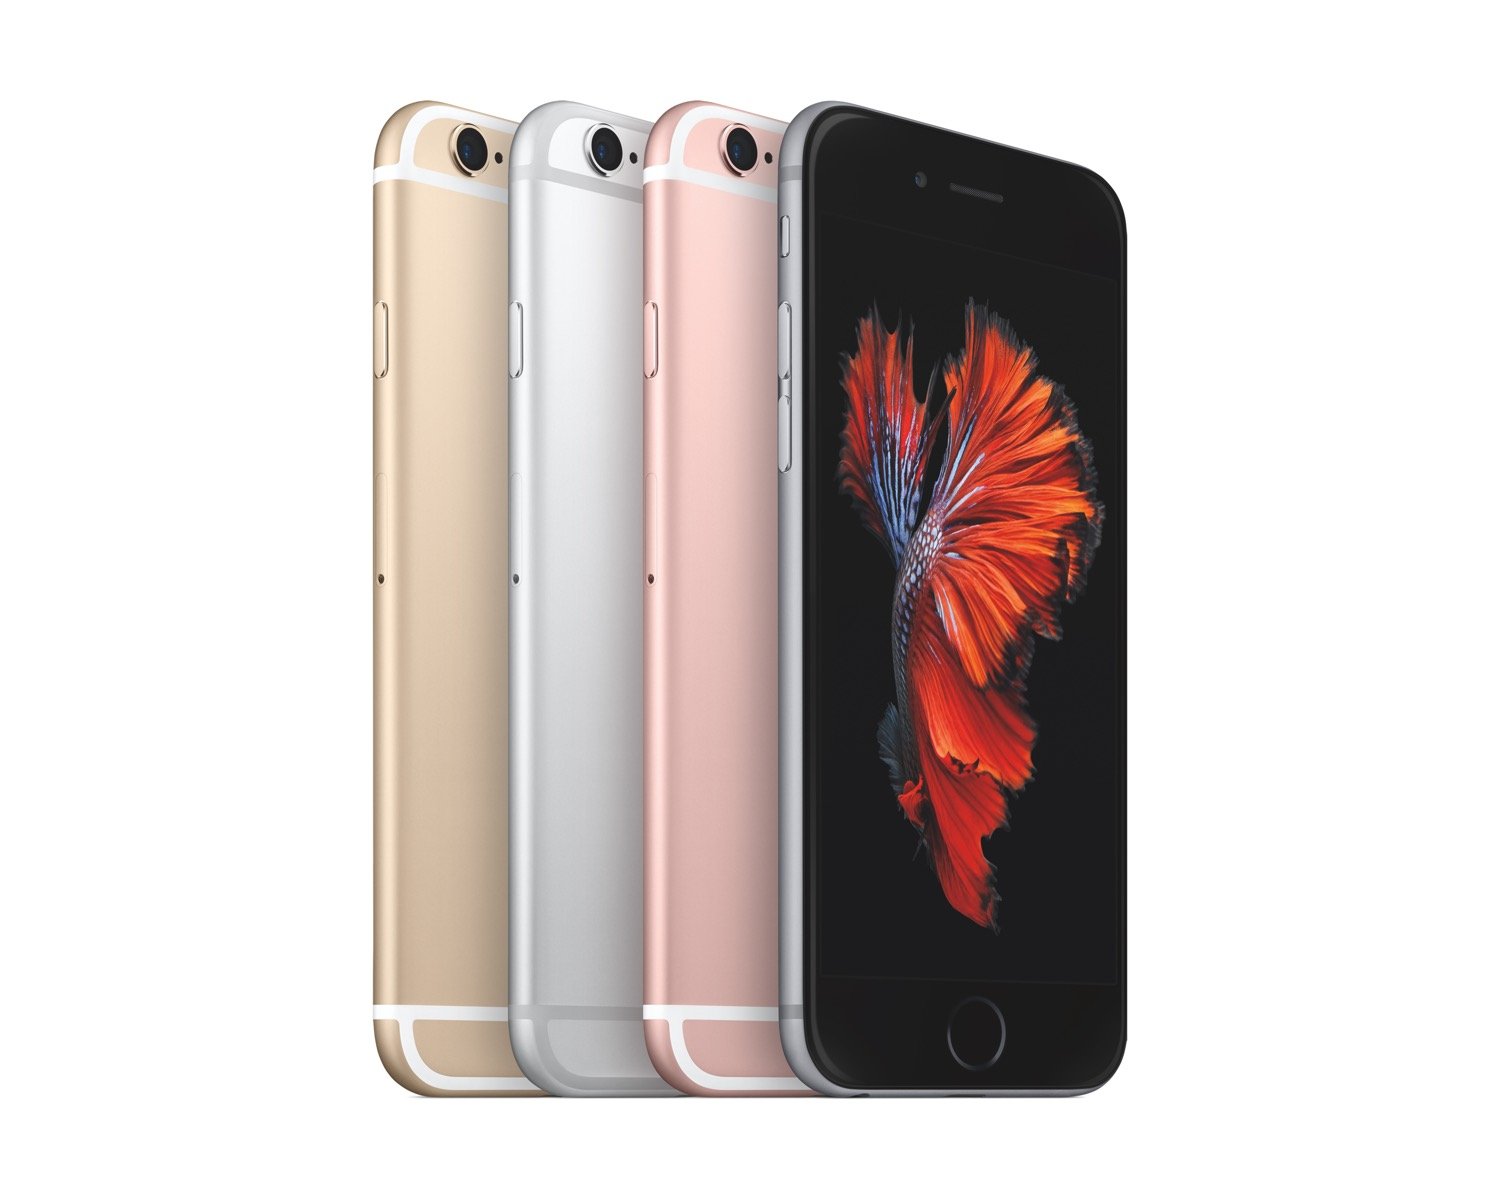 The Verizon iPhone 6s early upgrade offer is not available to everyone.